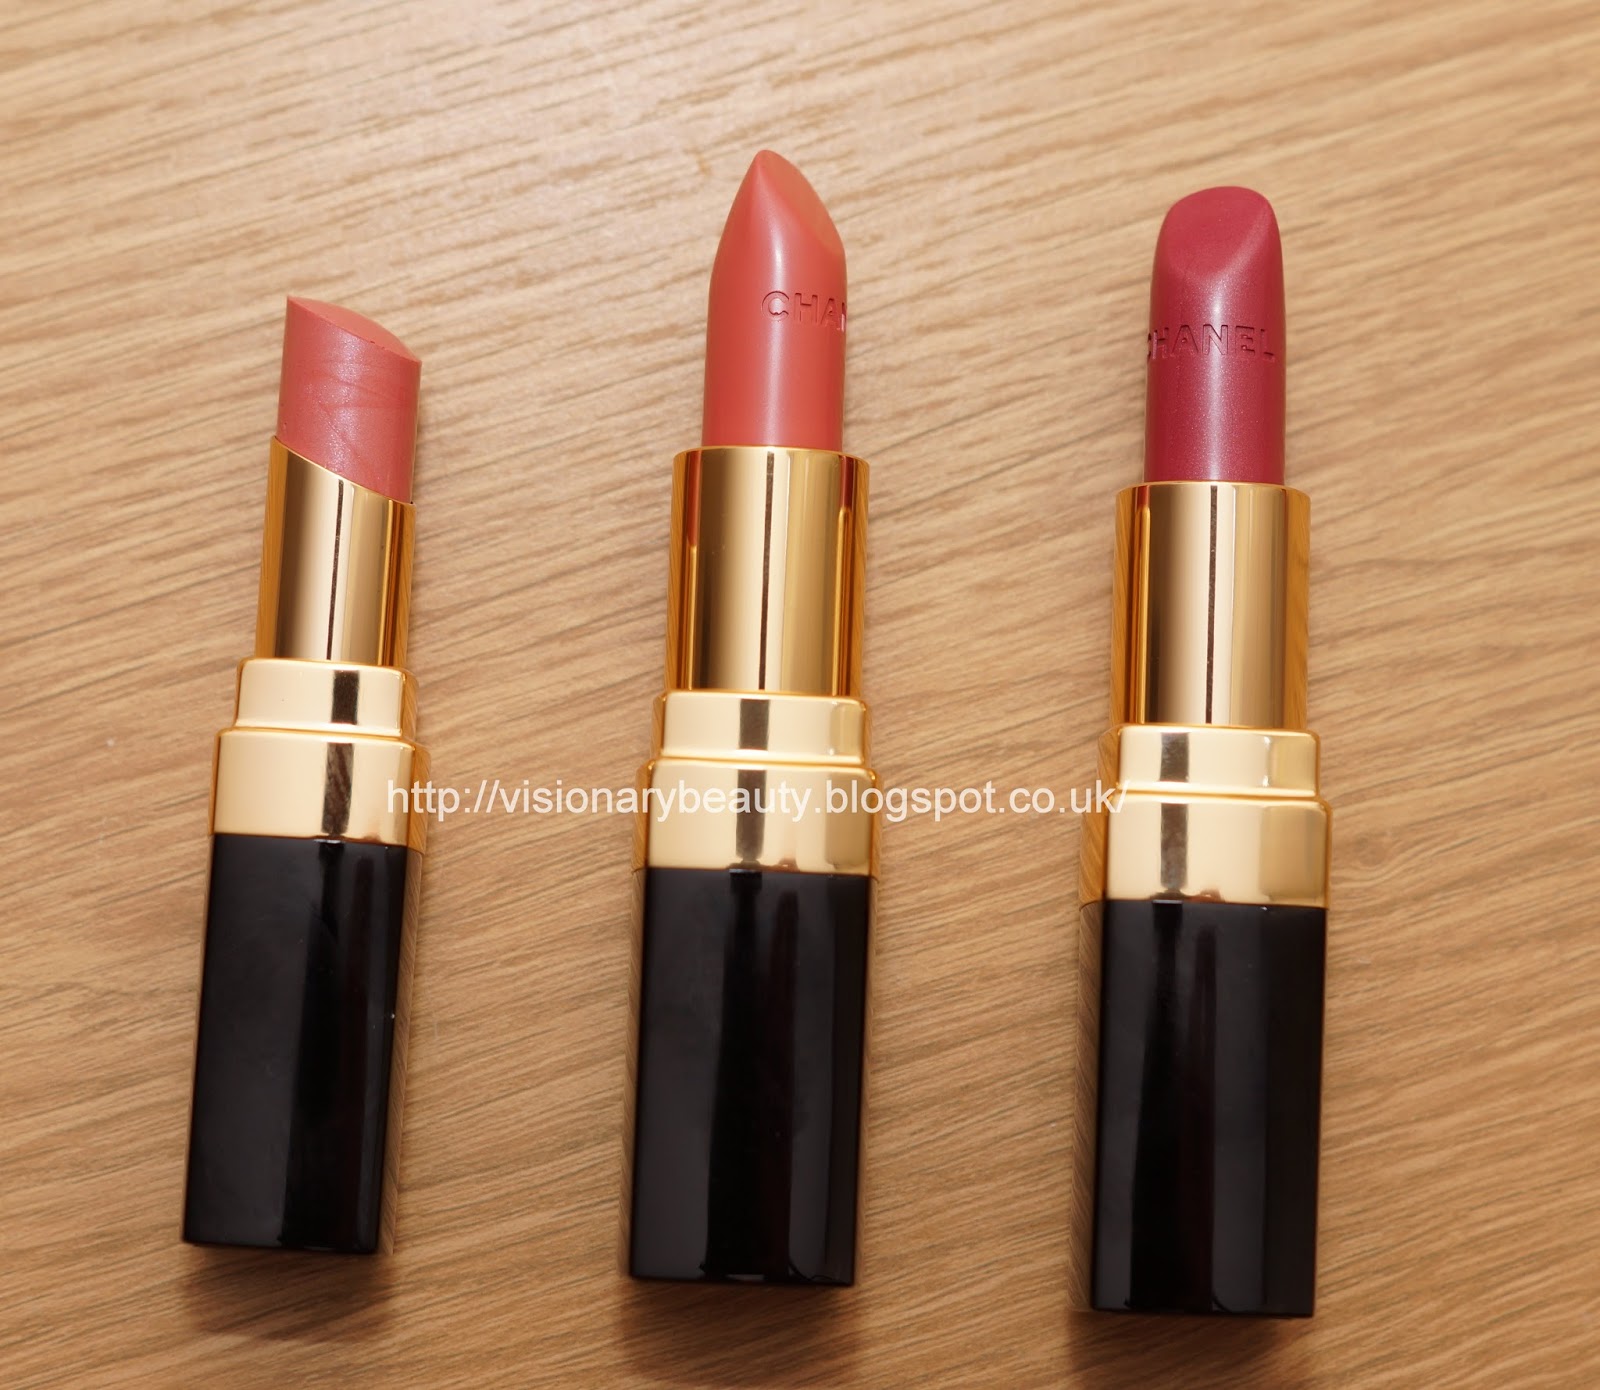 Visionary Beauty: Chanel Rouge Coco Shine collection update